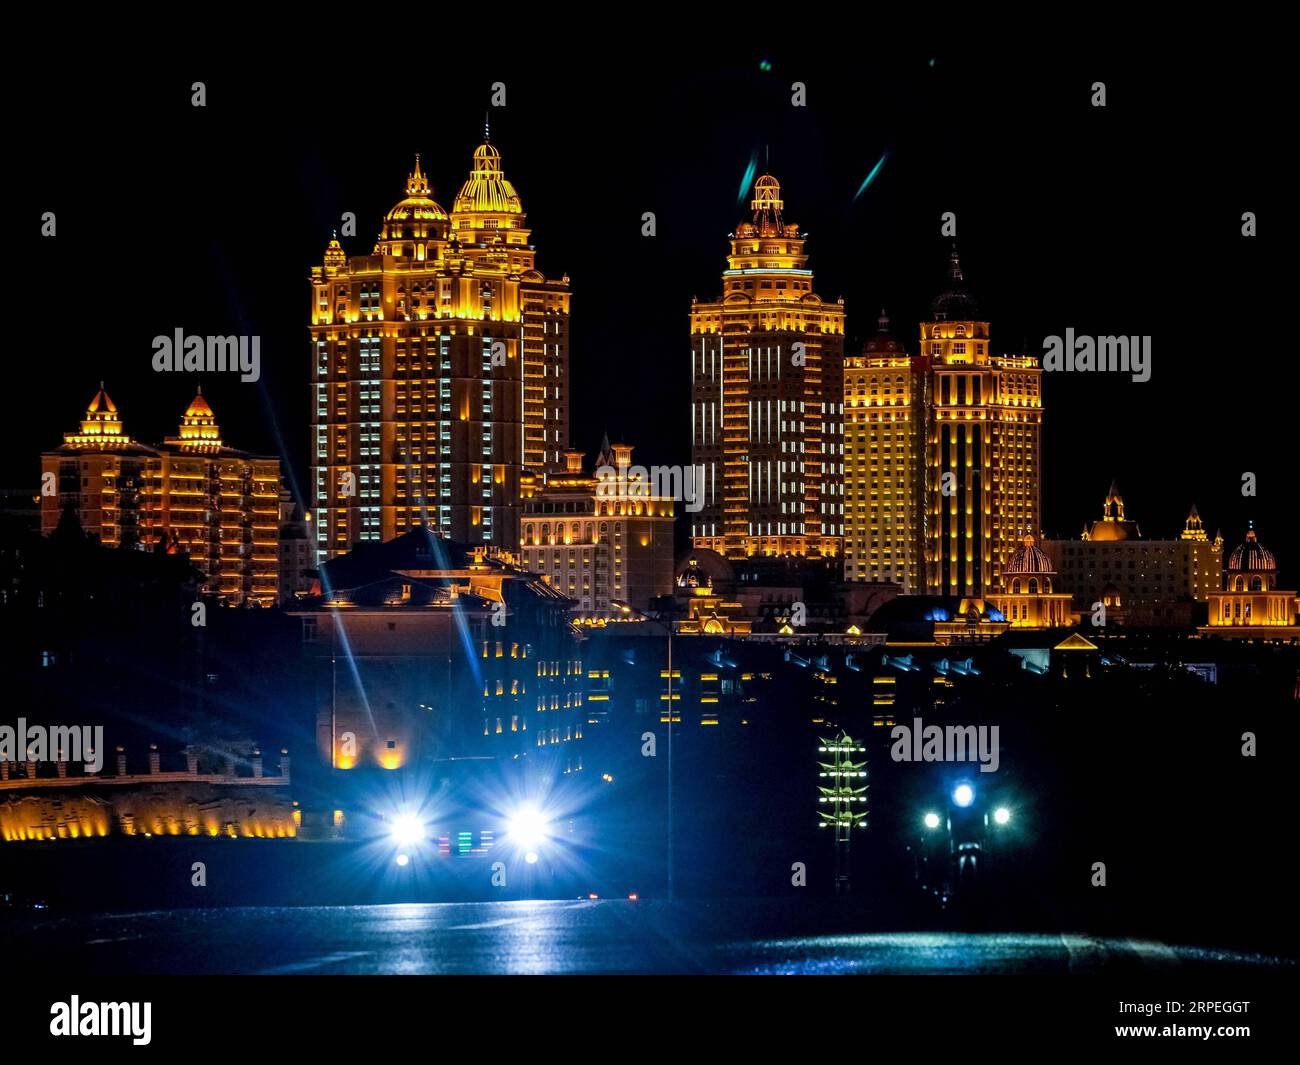 (190829) -- MANZHOULI, Aug. 29, 2019 -- Buildings are illuminated with energy efficient architectural LED lighting in Manzhouli, north China s Inner Mongolia Autonomous Region, Aug. 27, 2019. ) CHINA-INNER MONGOLIA-MANZHOULI-NIGHT VIEW (CN) ShenxBohan PUBLICATIONxNOTxINxCHN Stock Photo